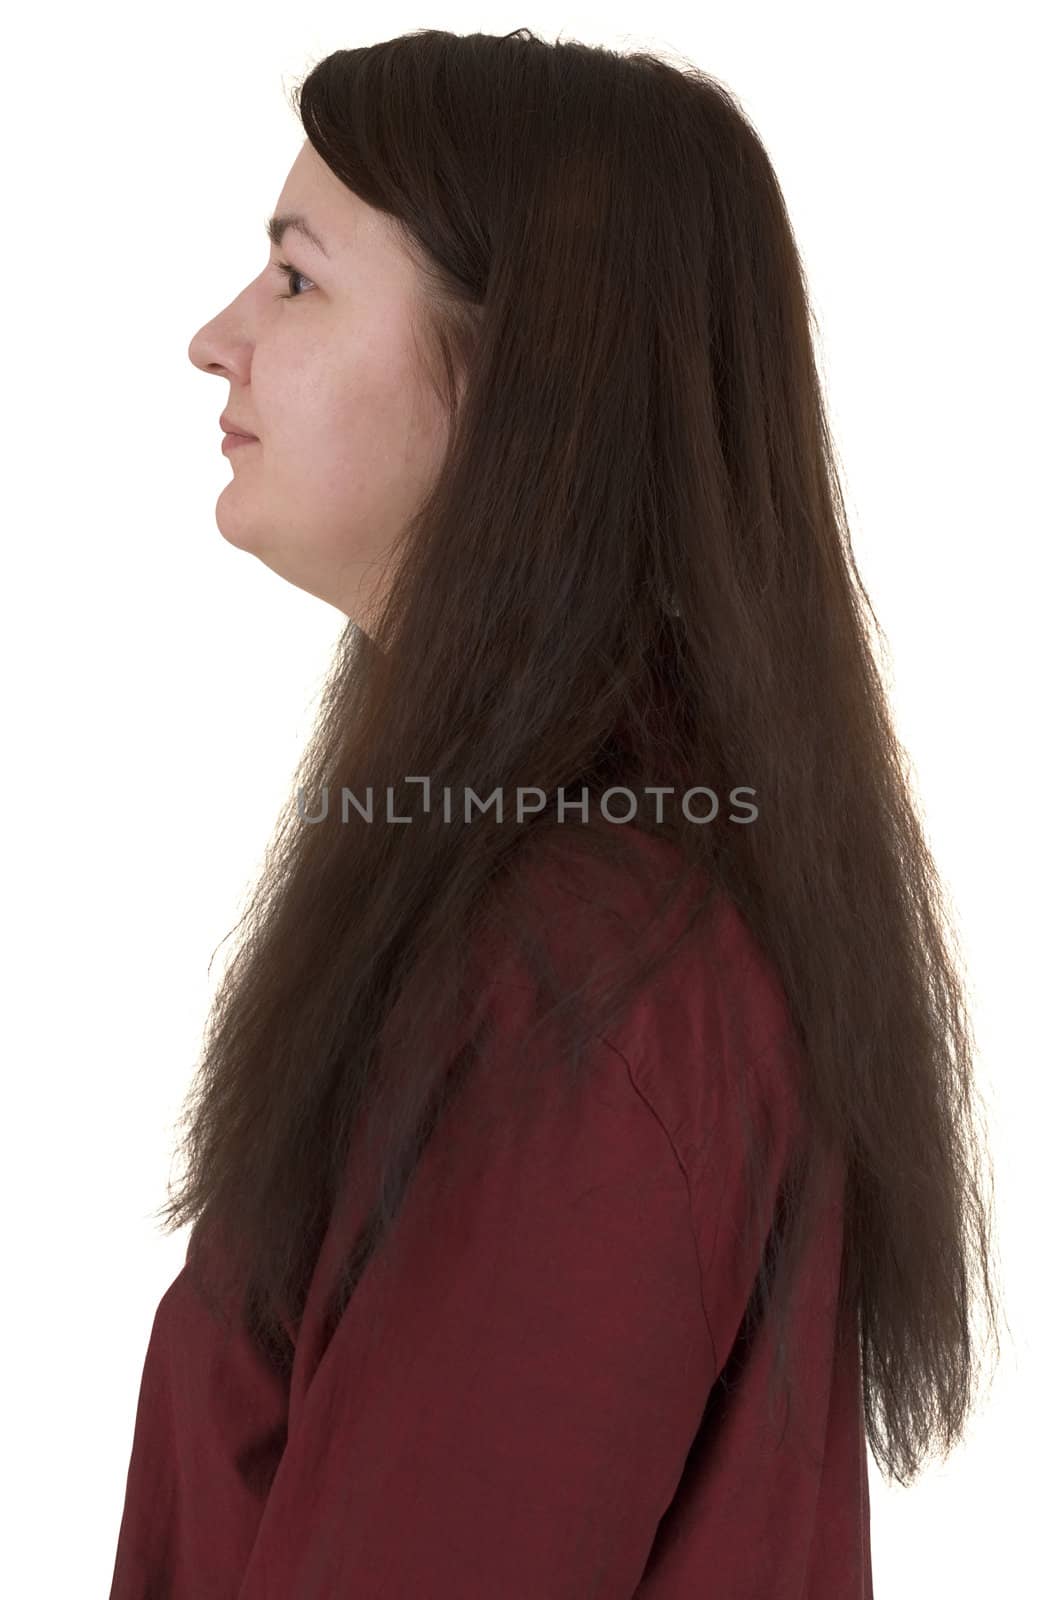 Female portrait with long hair on white